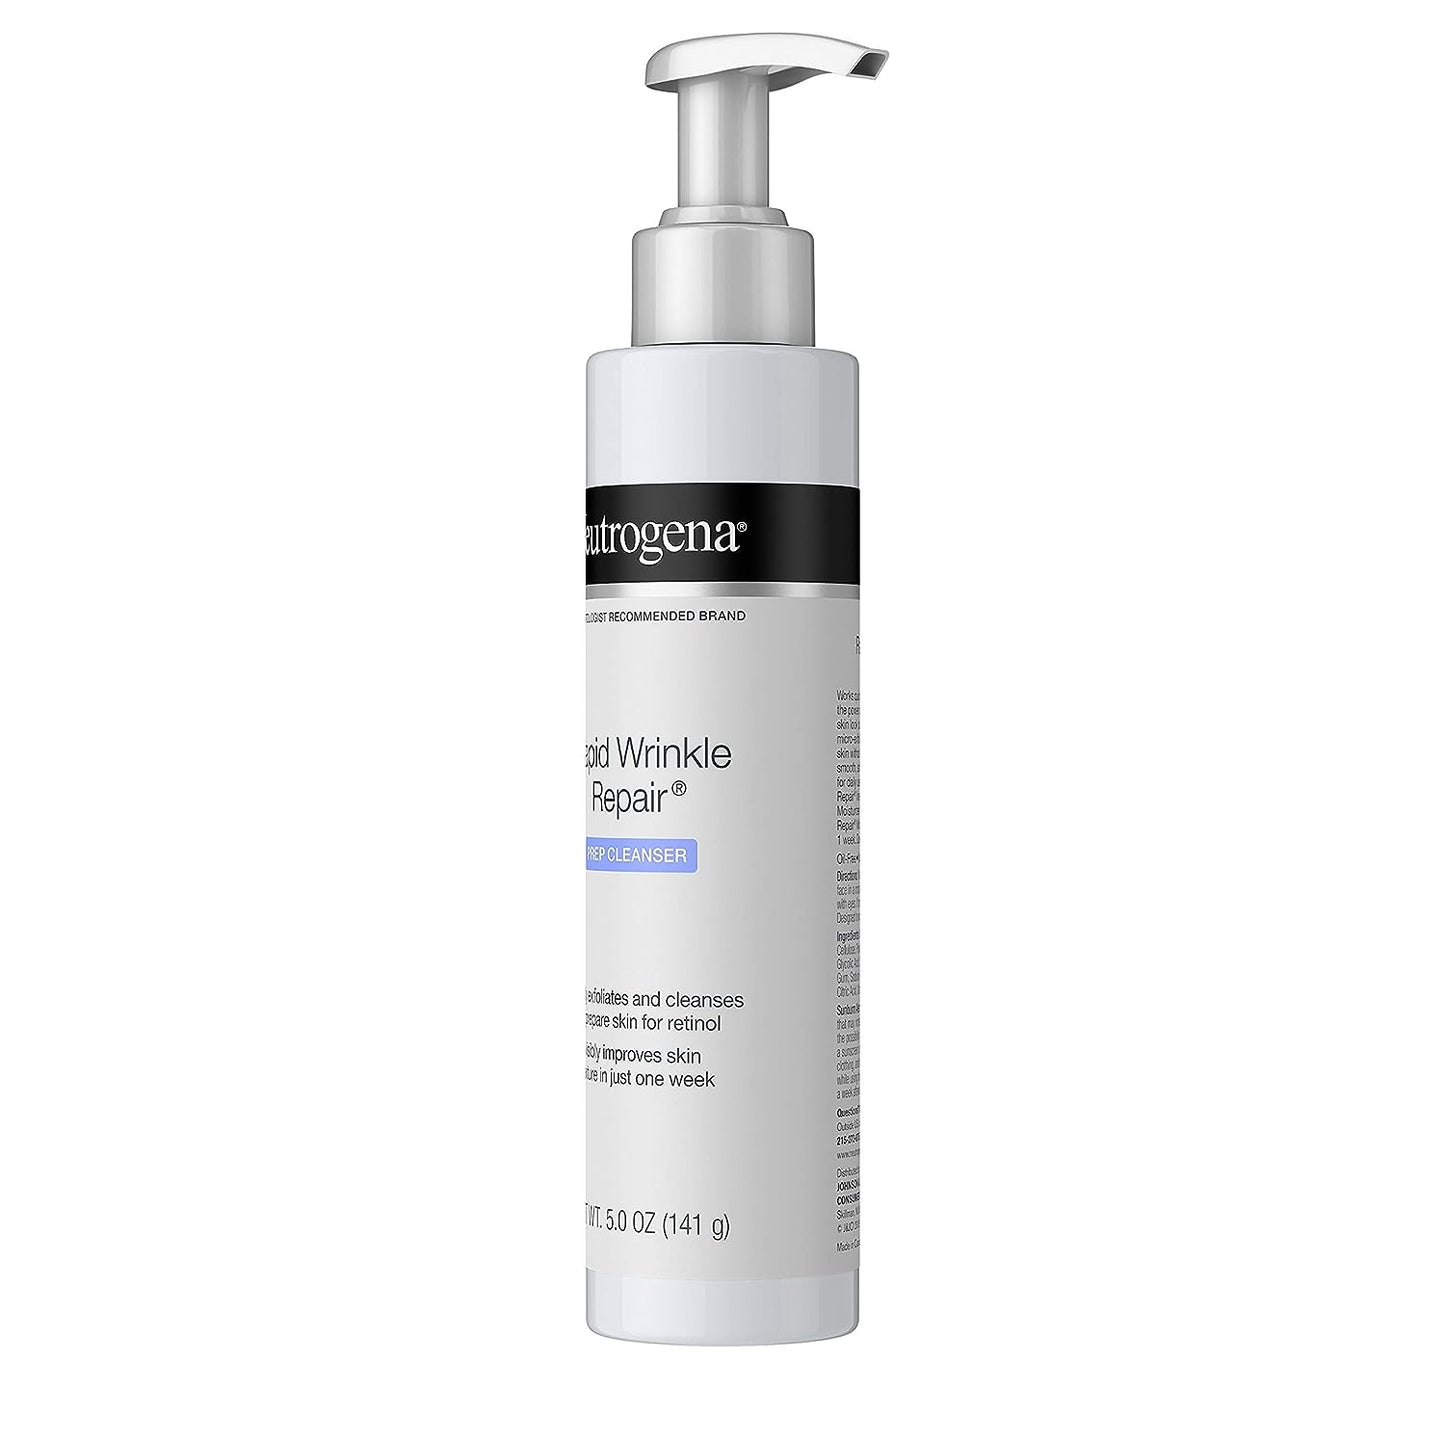 Neutrogena Rapid Wrinkle Repair Anti-Wrinkle Retinol Prep Facial Cream Cleanser with Glycolic Acid and Micro-Exfoliant to Gently Cleanse and Exfoliate Skin, Oil-Free and Non-Comedogenic, 5 oz